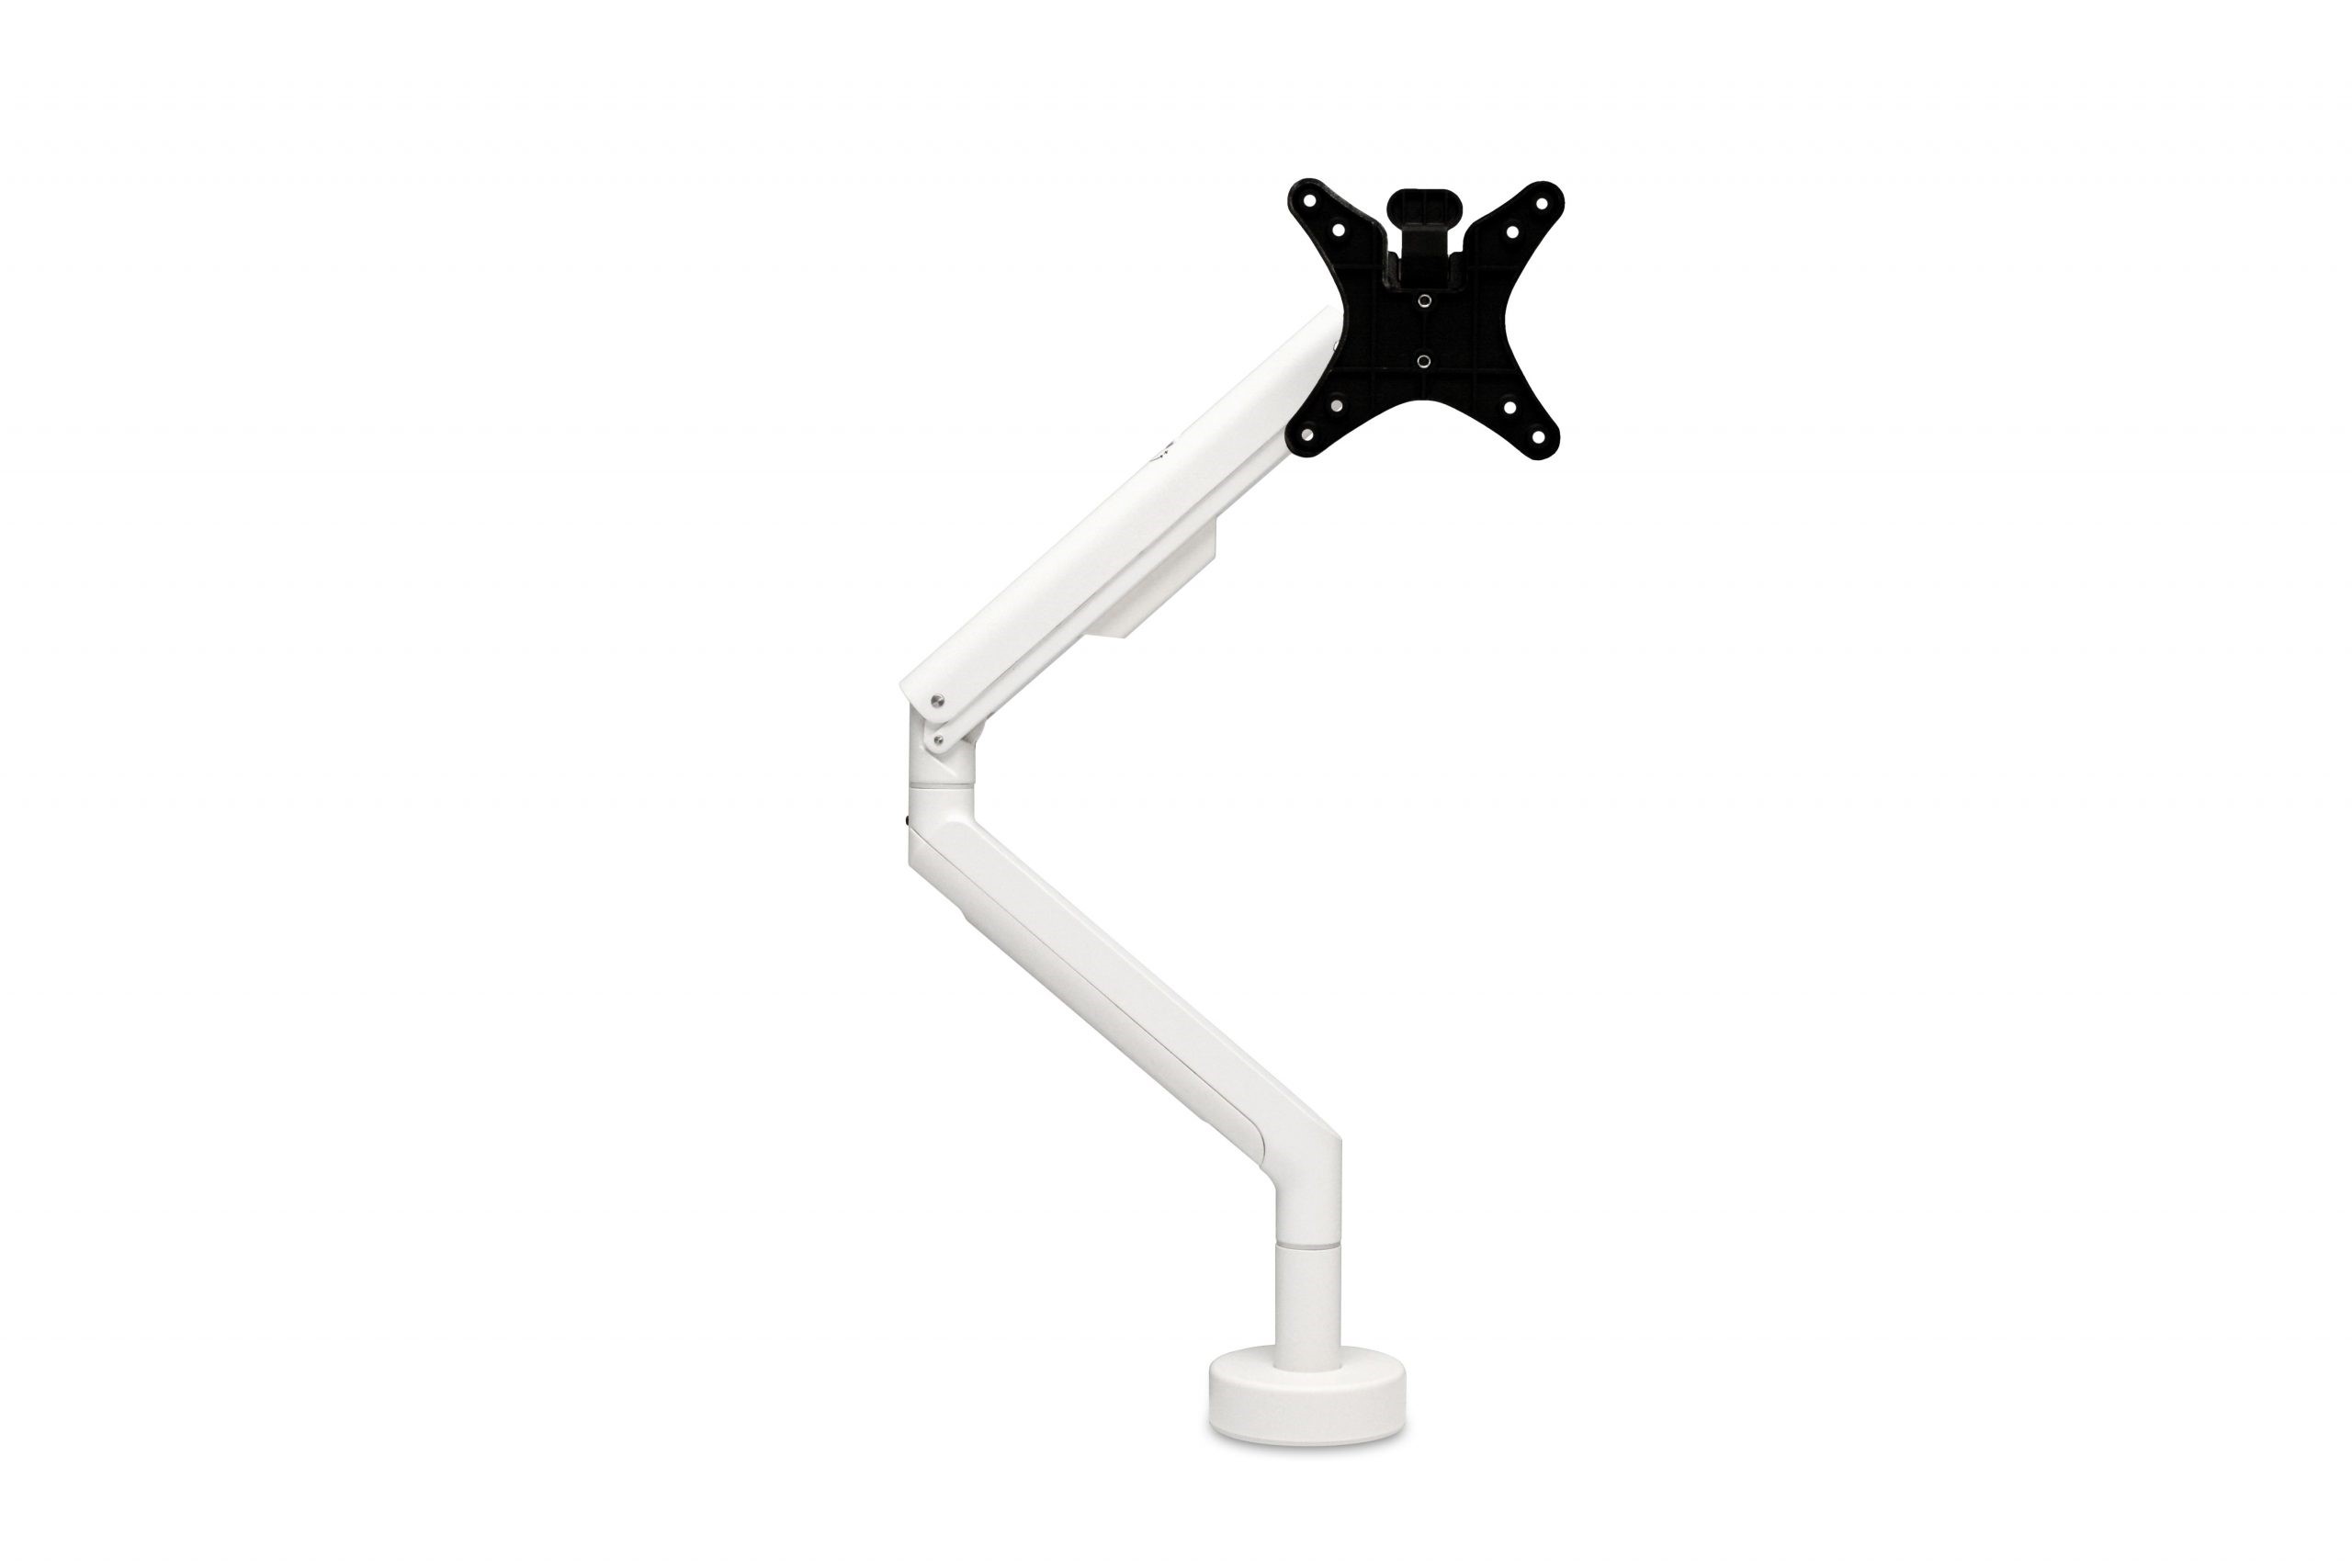 reach spring assisted monitor arm